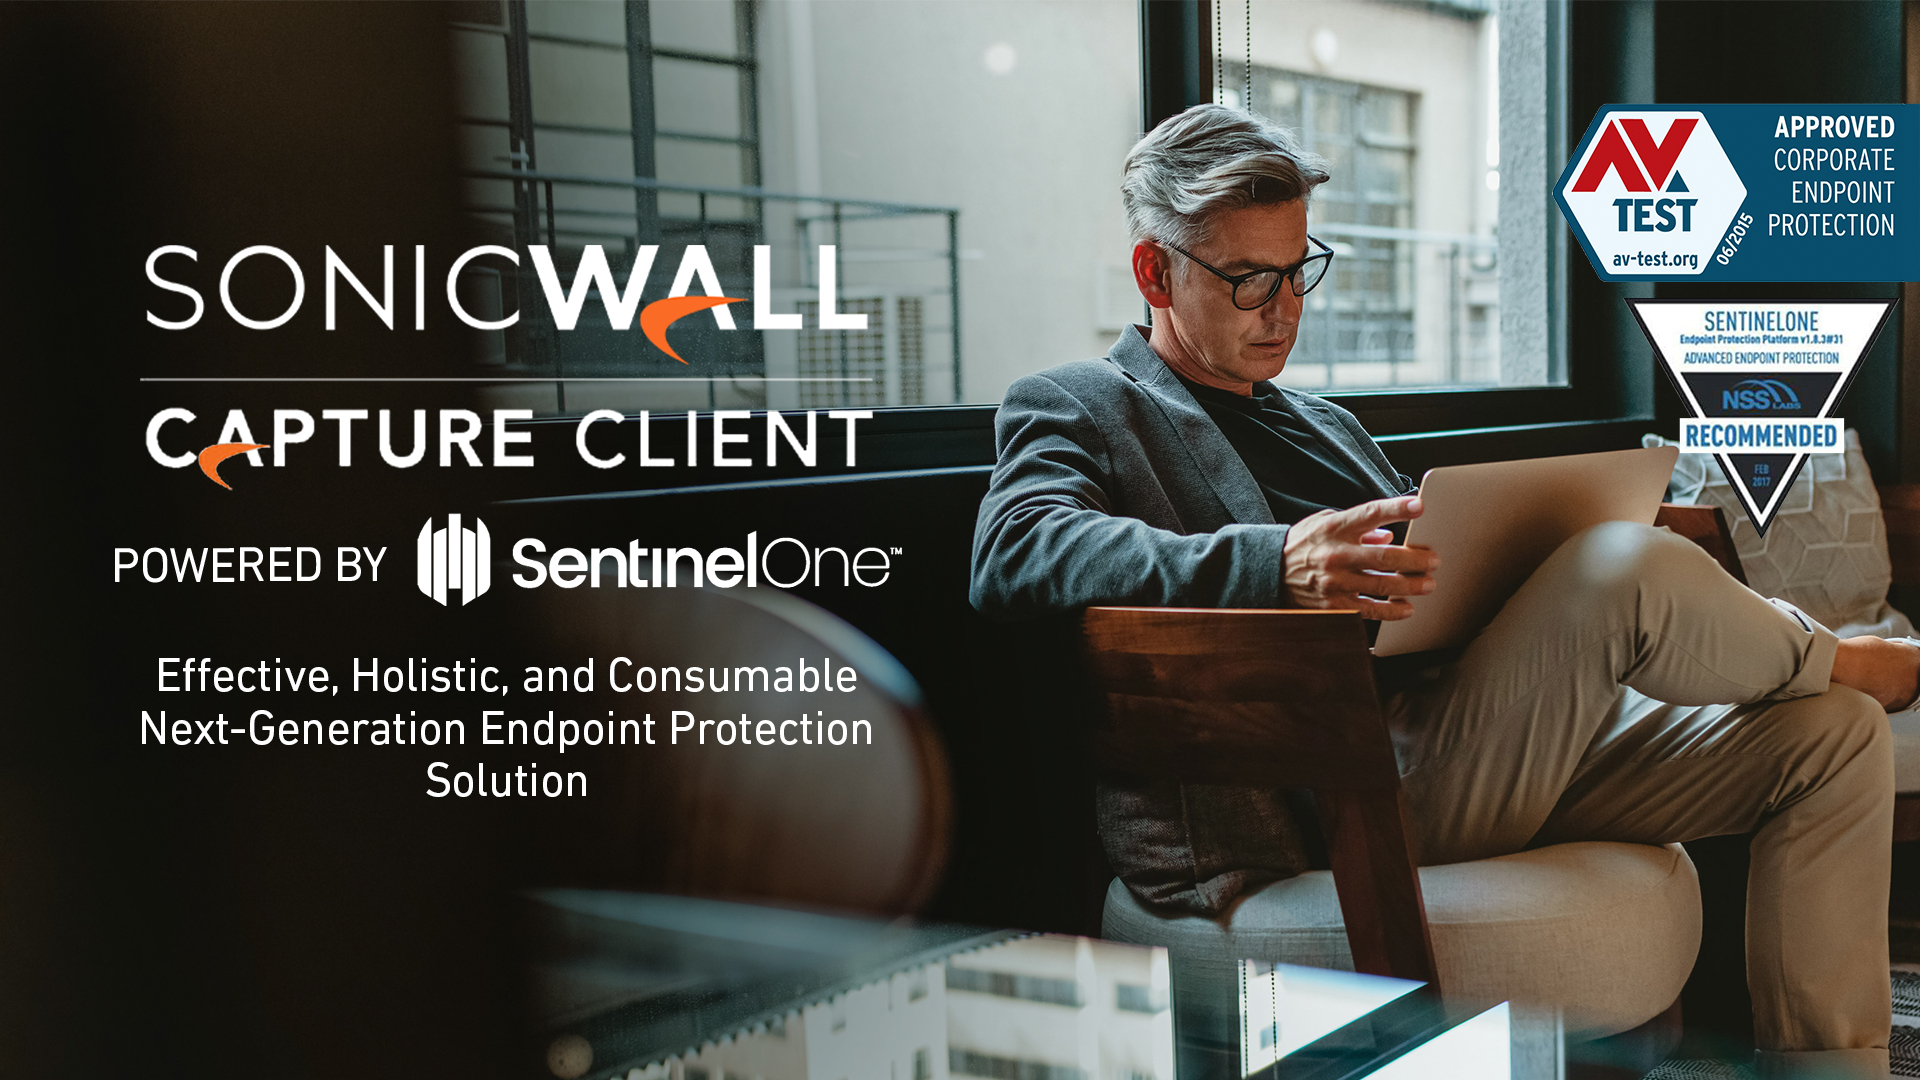 Sonicwall Capture Client powered by SentinelOne